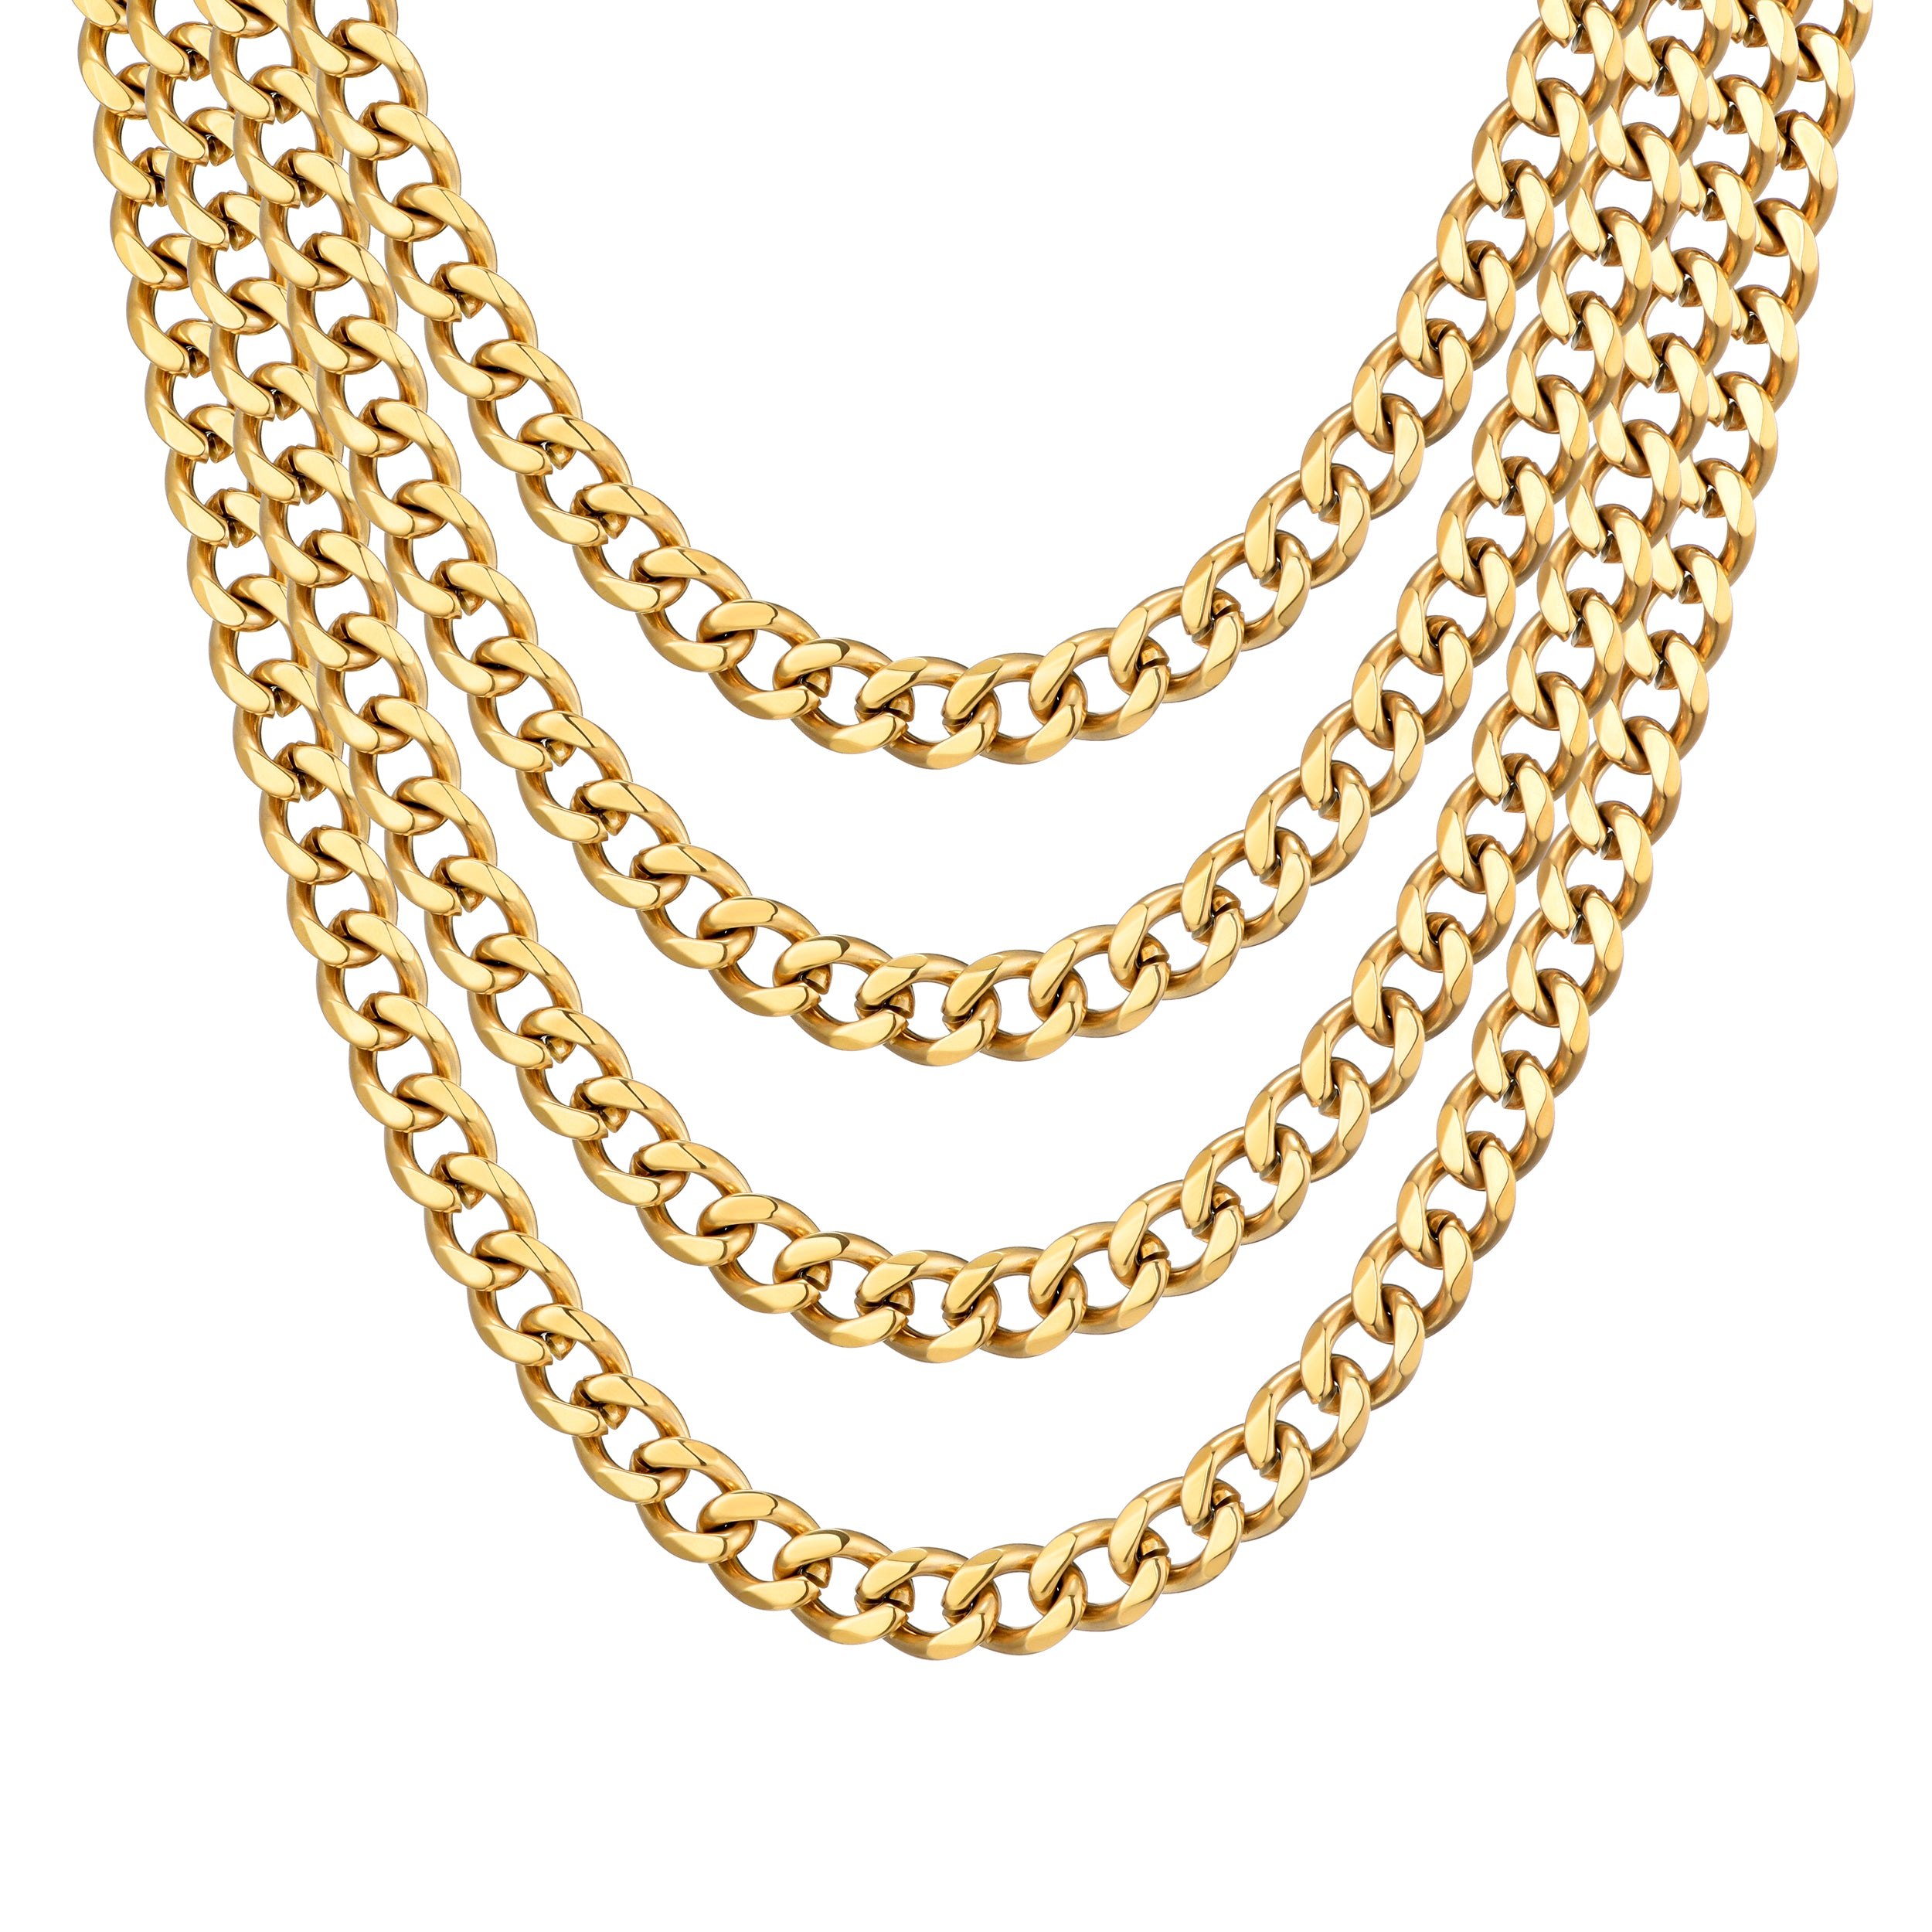 Men's 12mm Gold Plated Steel 18-24 Inch Curb Chain Necklace by Philip Jones Jewellery